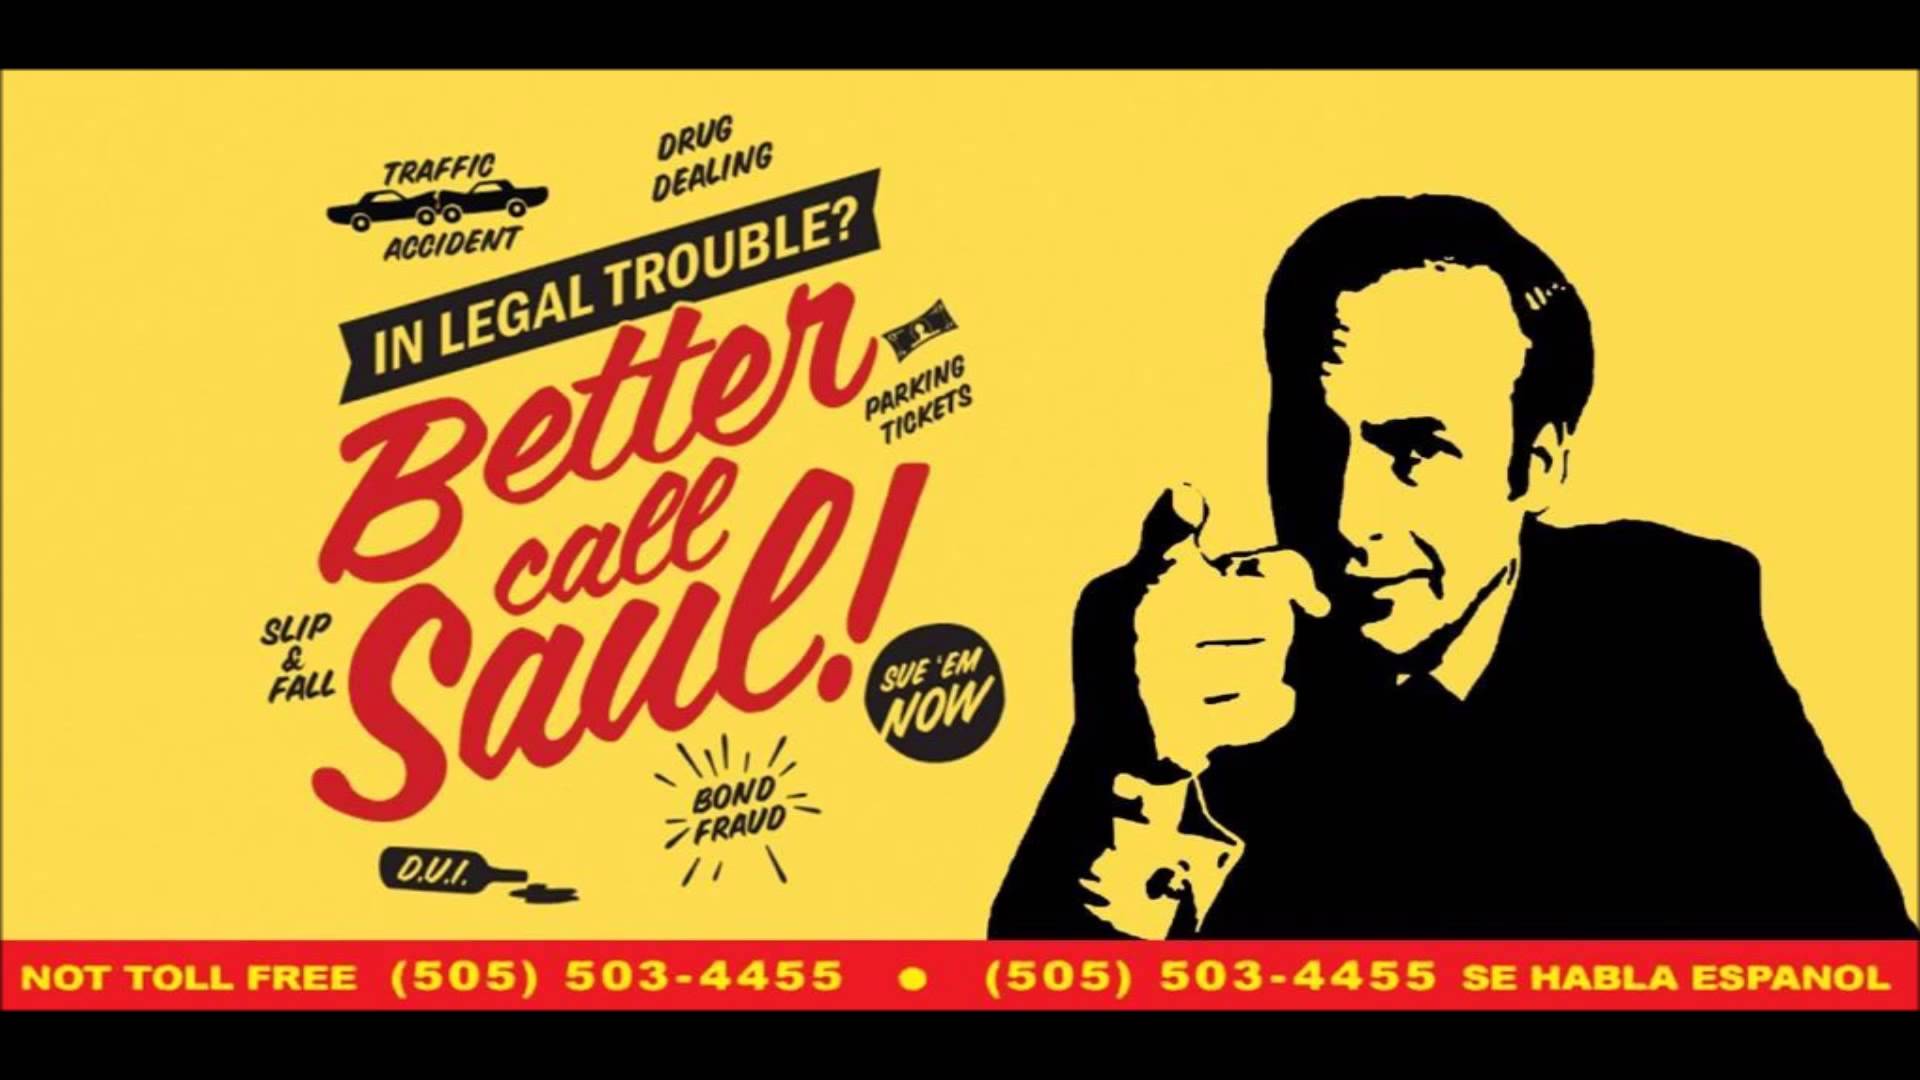 Better call saul wallpaper by Counna  Download on ZEDGE  4b38